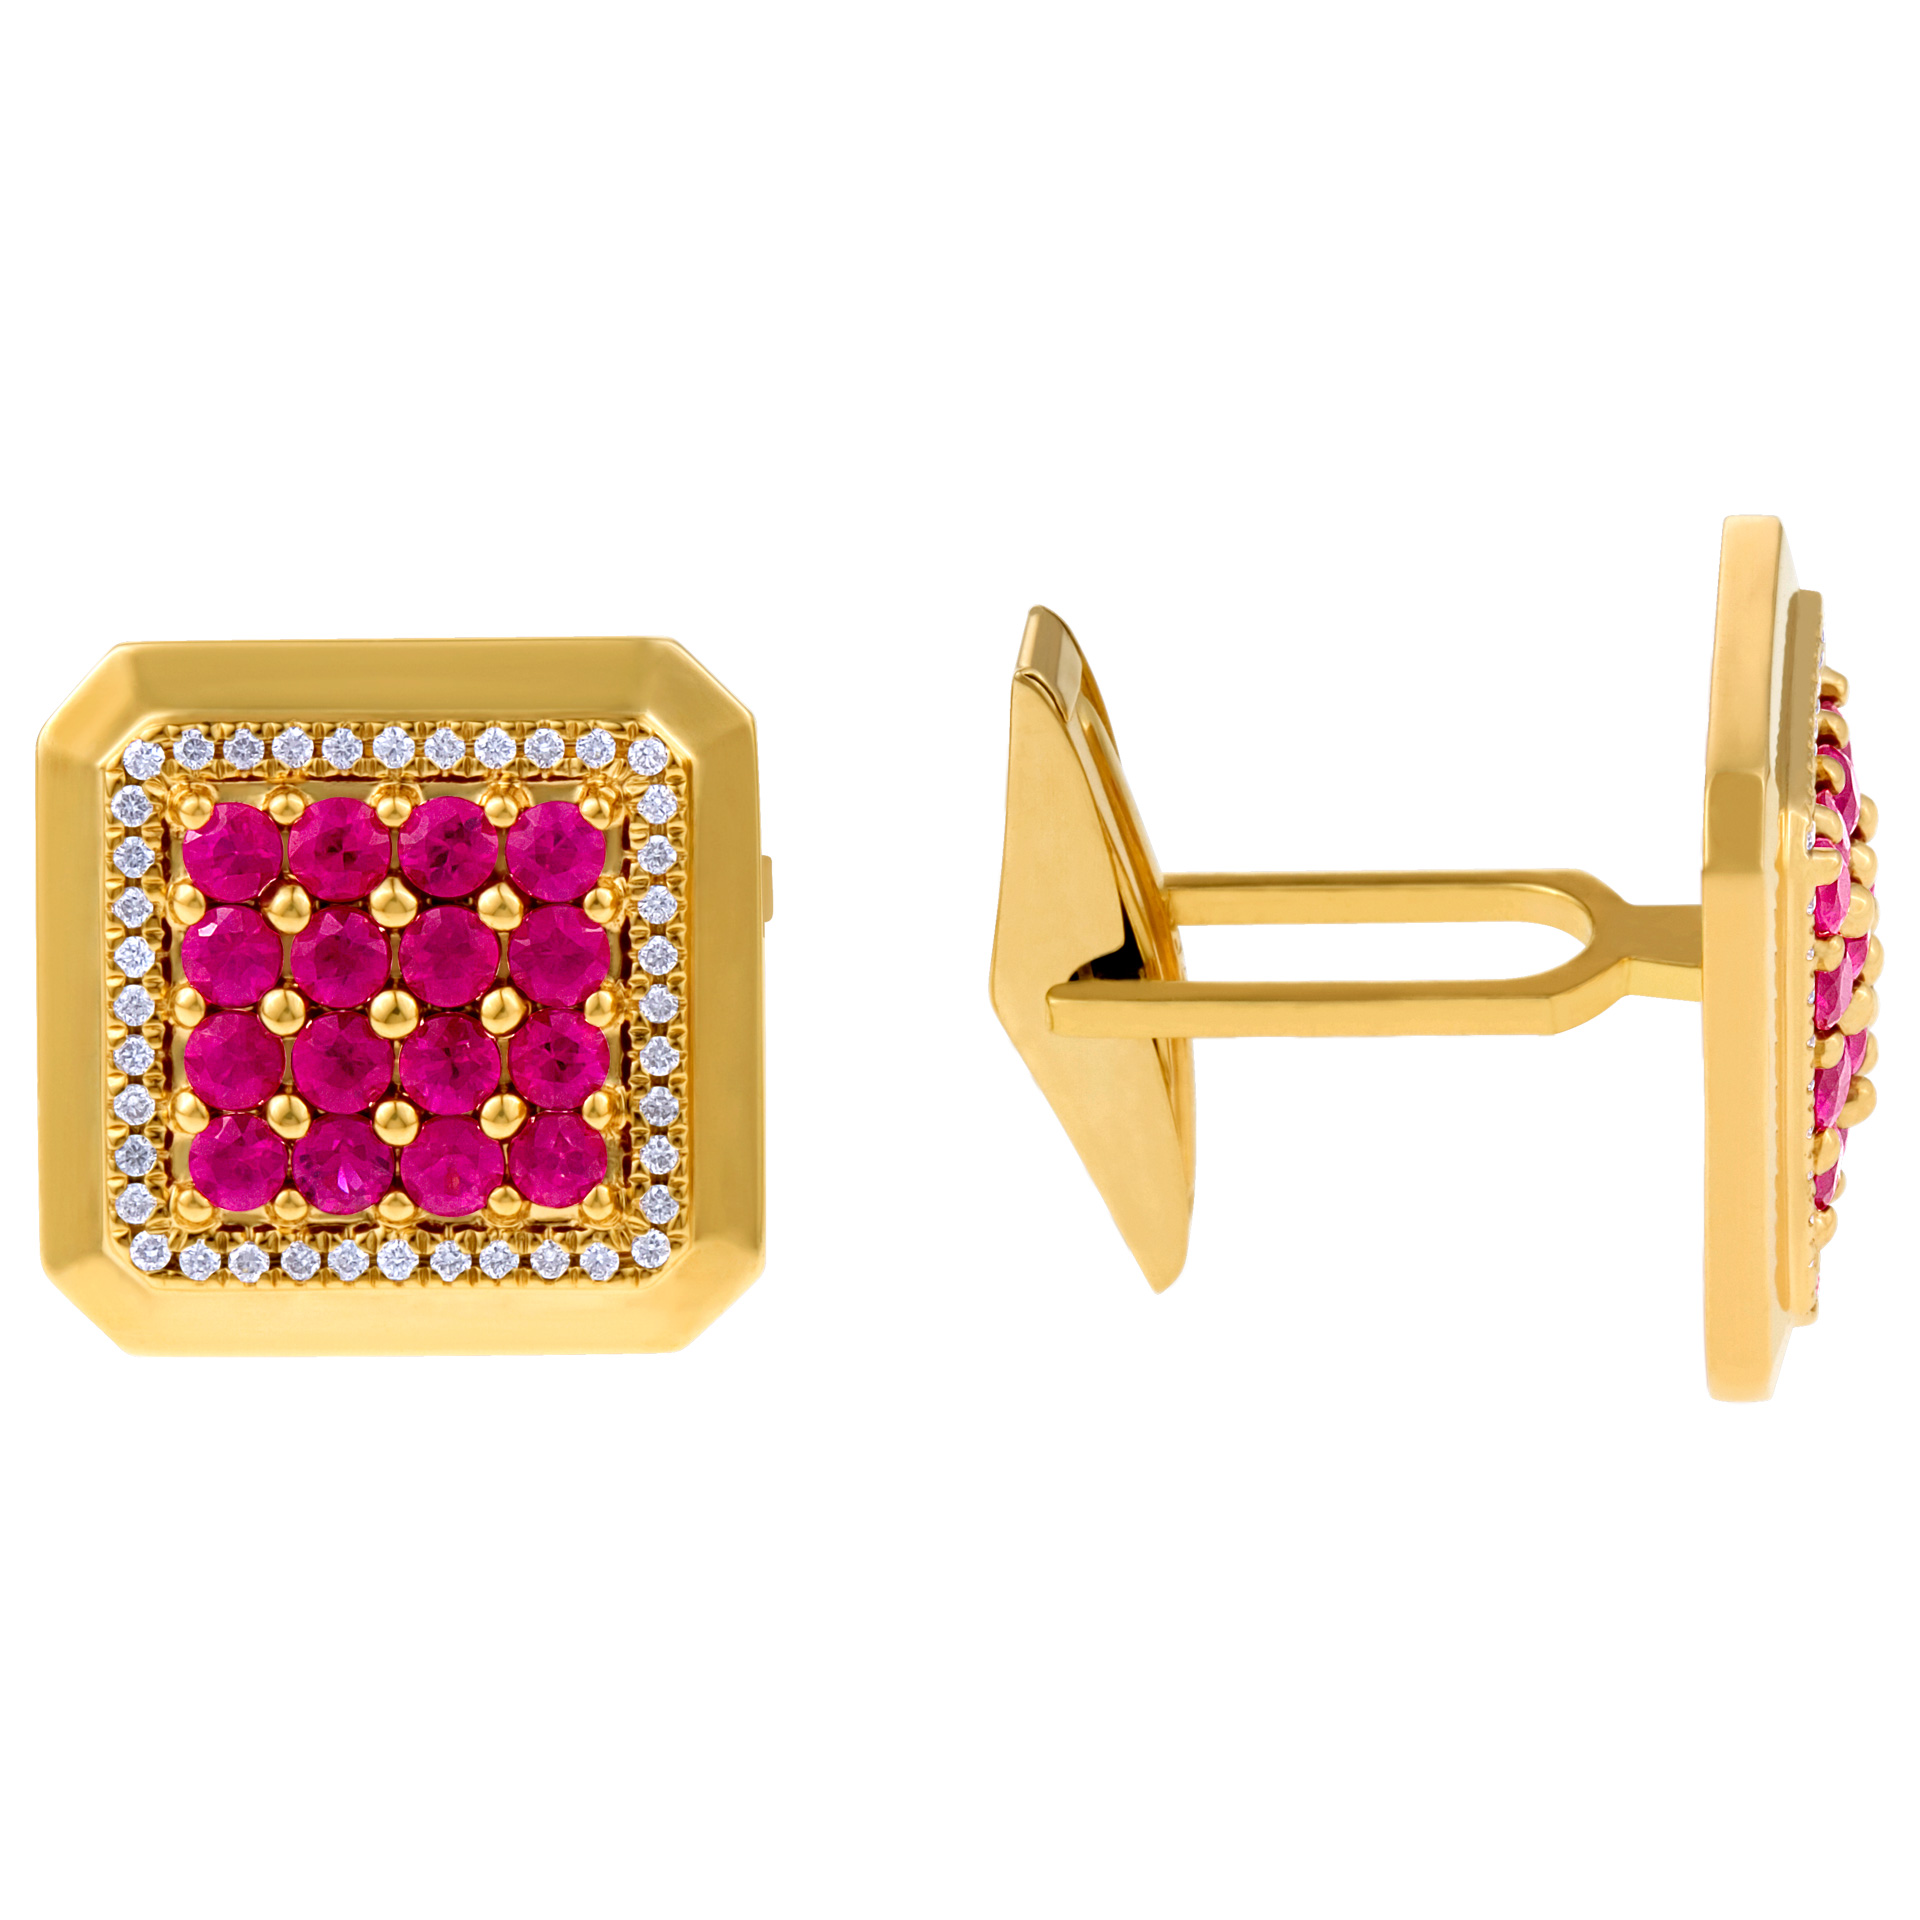 Exquisite diamond and ruby cufflinks in 18k yellow gold image 1